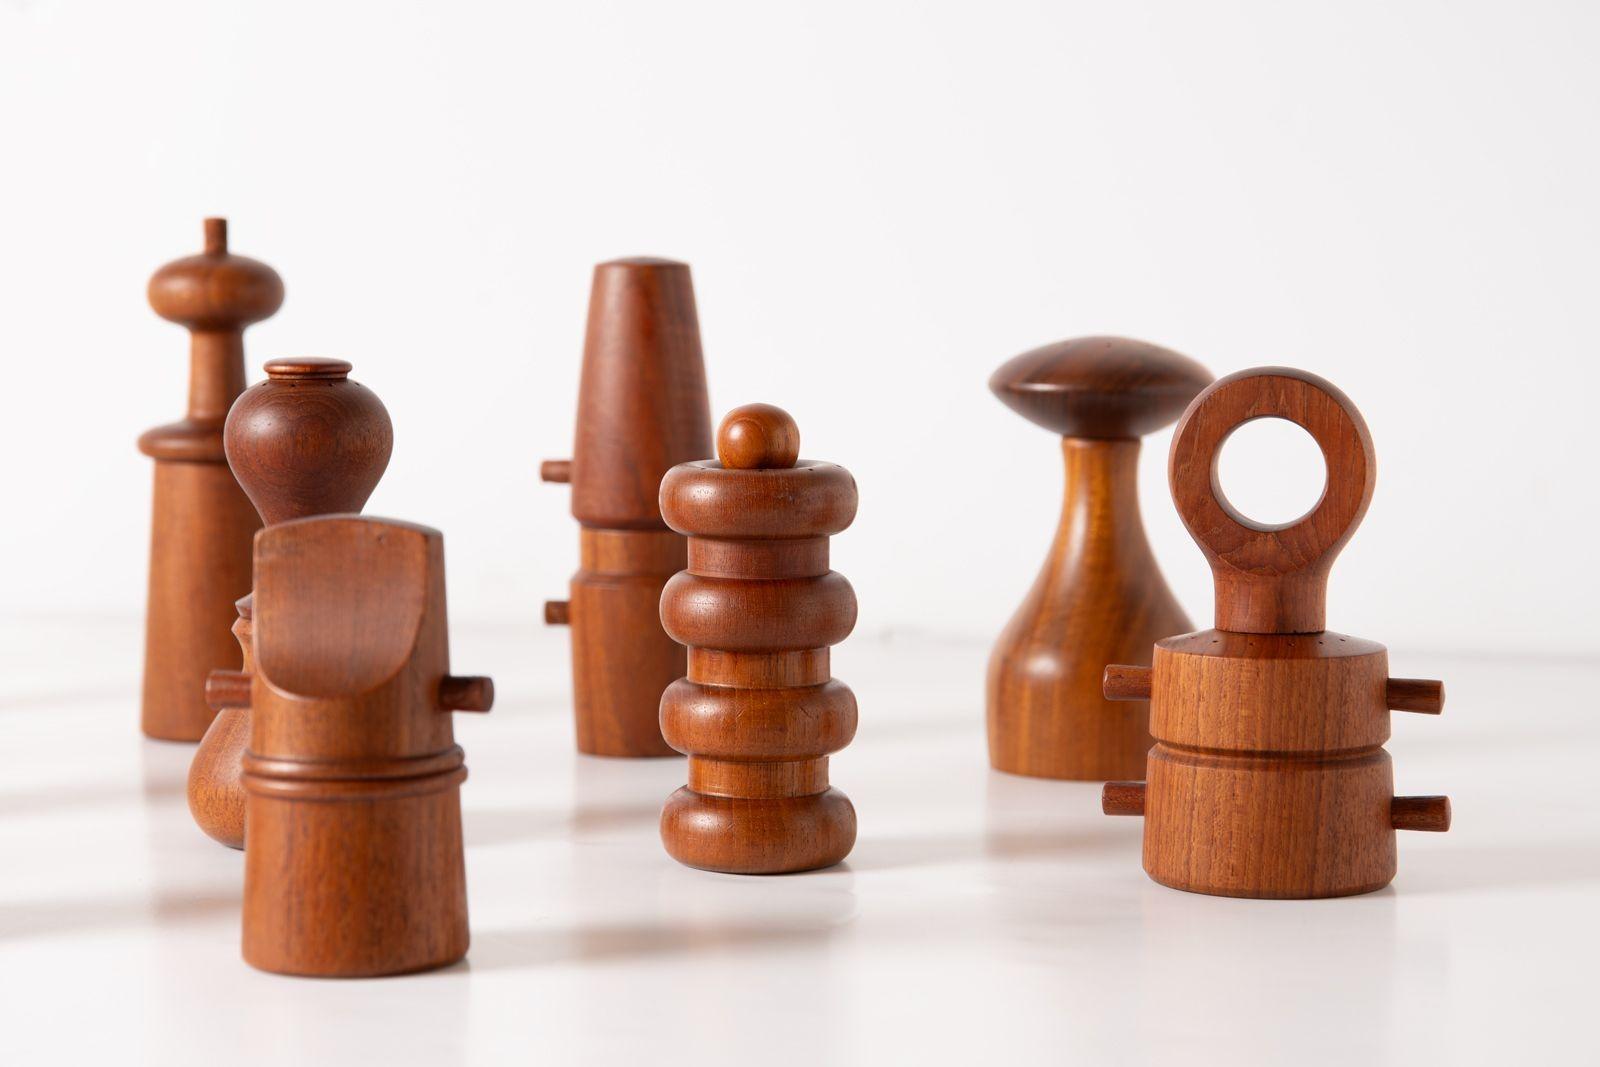 Mid-20th Century Dansk Pepper Mills by Jens Quistgaard - A Curated Collection of 17 For Sale